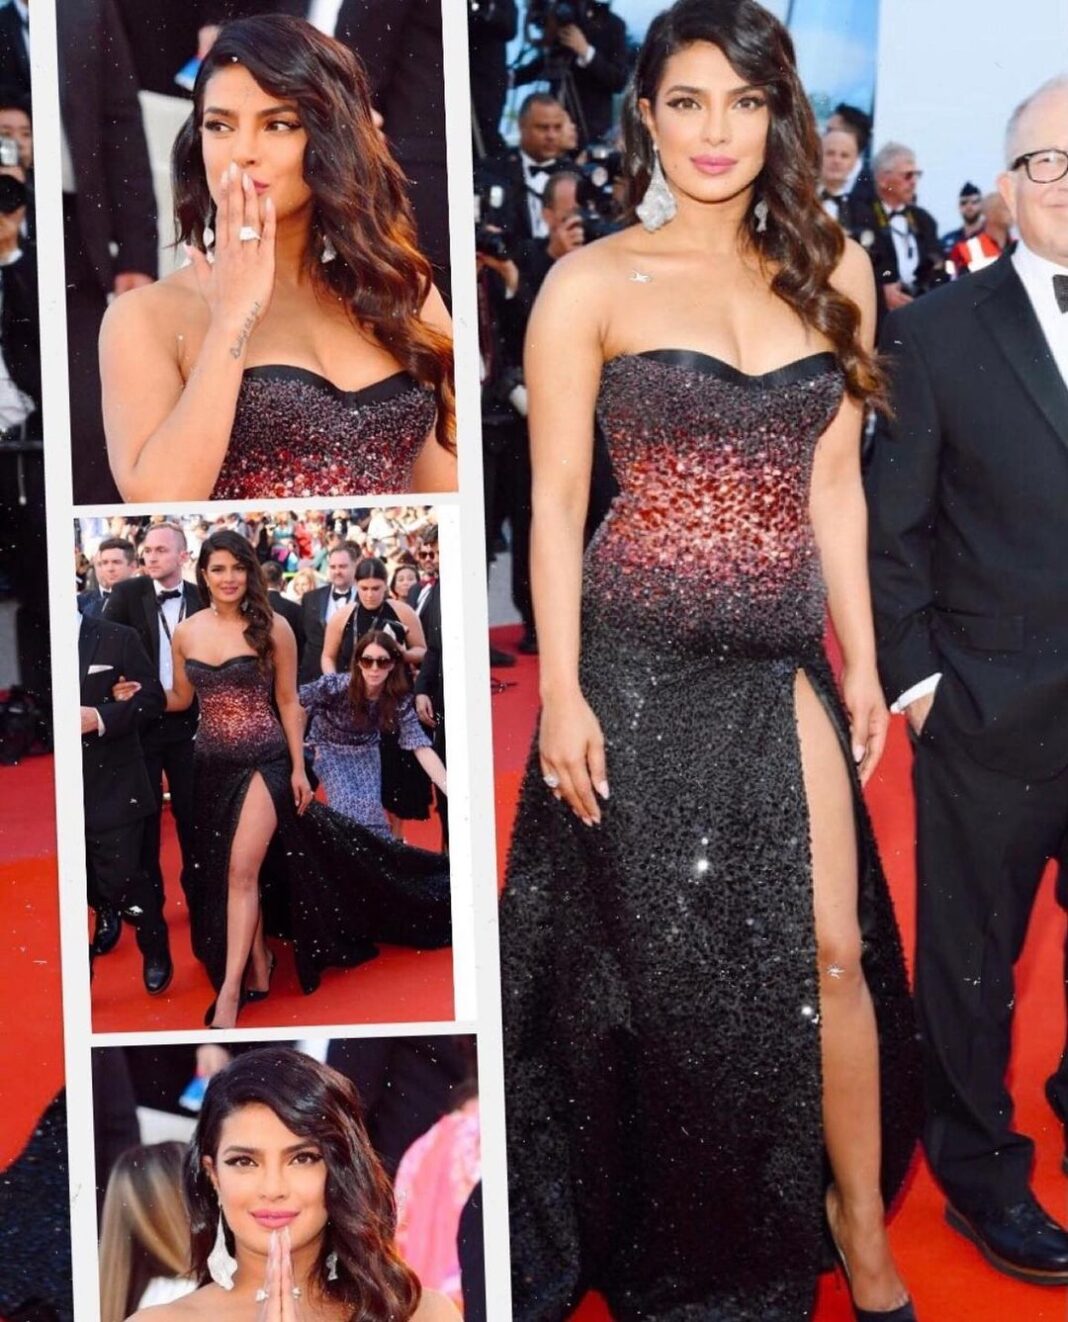 Priyanka Chopra Instagram - I may look chill on the outside here, but little did everyone know I had just been freaking out on the inside. 😂 The delicate zipper to this vintage @roberto_cavalli dress broke as they were zipping it up minutes before I had to leave for the red carpet at Cannes last year. The solution? My amazing team had to sew me into the dress on the way in the 5 minute car ride! Find out more BTS stories like this from the Met Gala, Miss World and more in my memoir #Unfinished! Available for pre-sale now in the link in my bio. ❤️